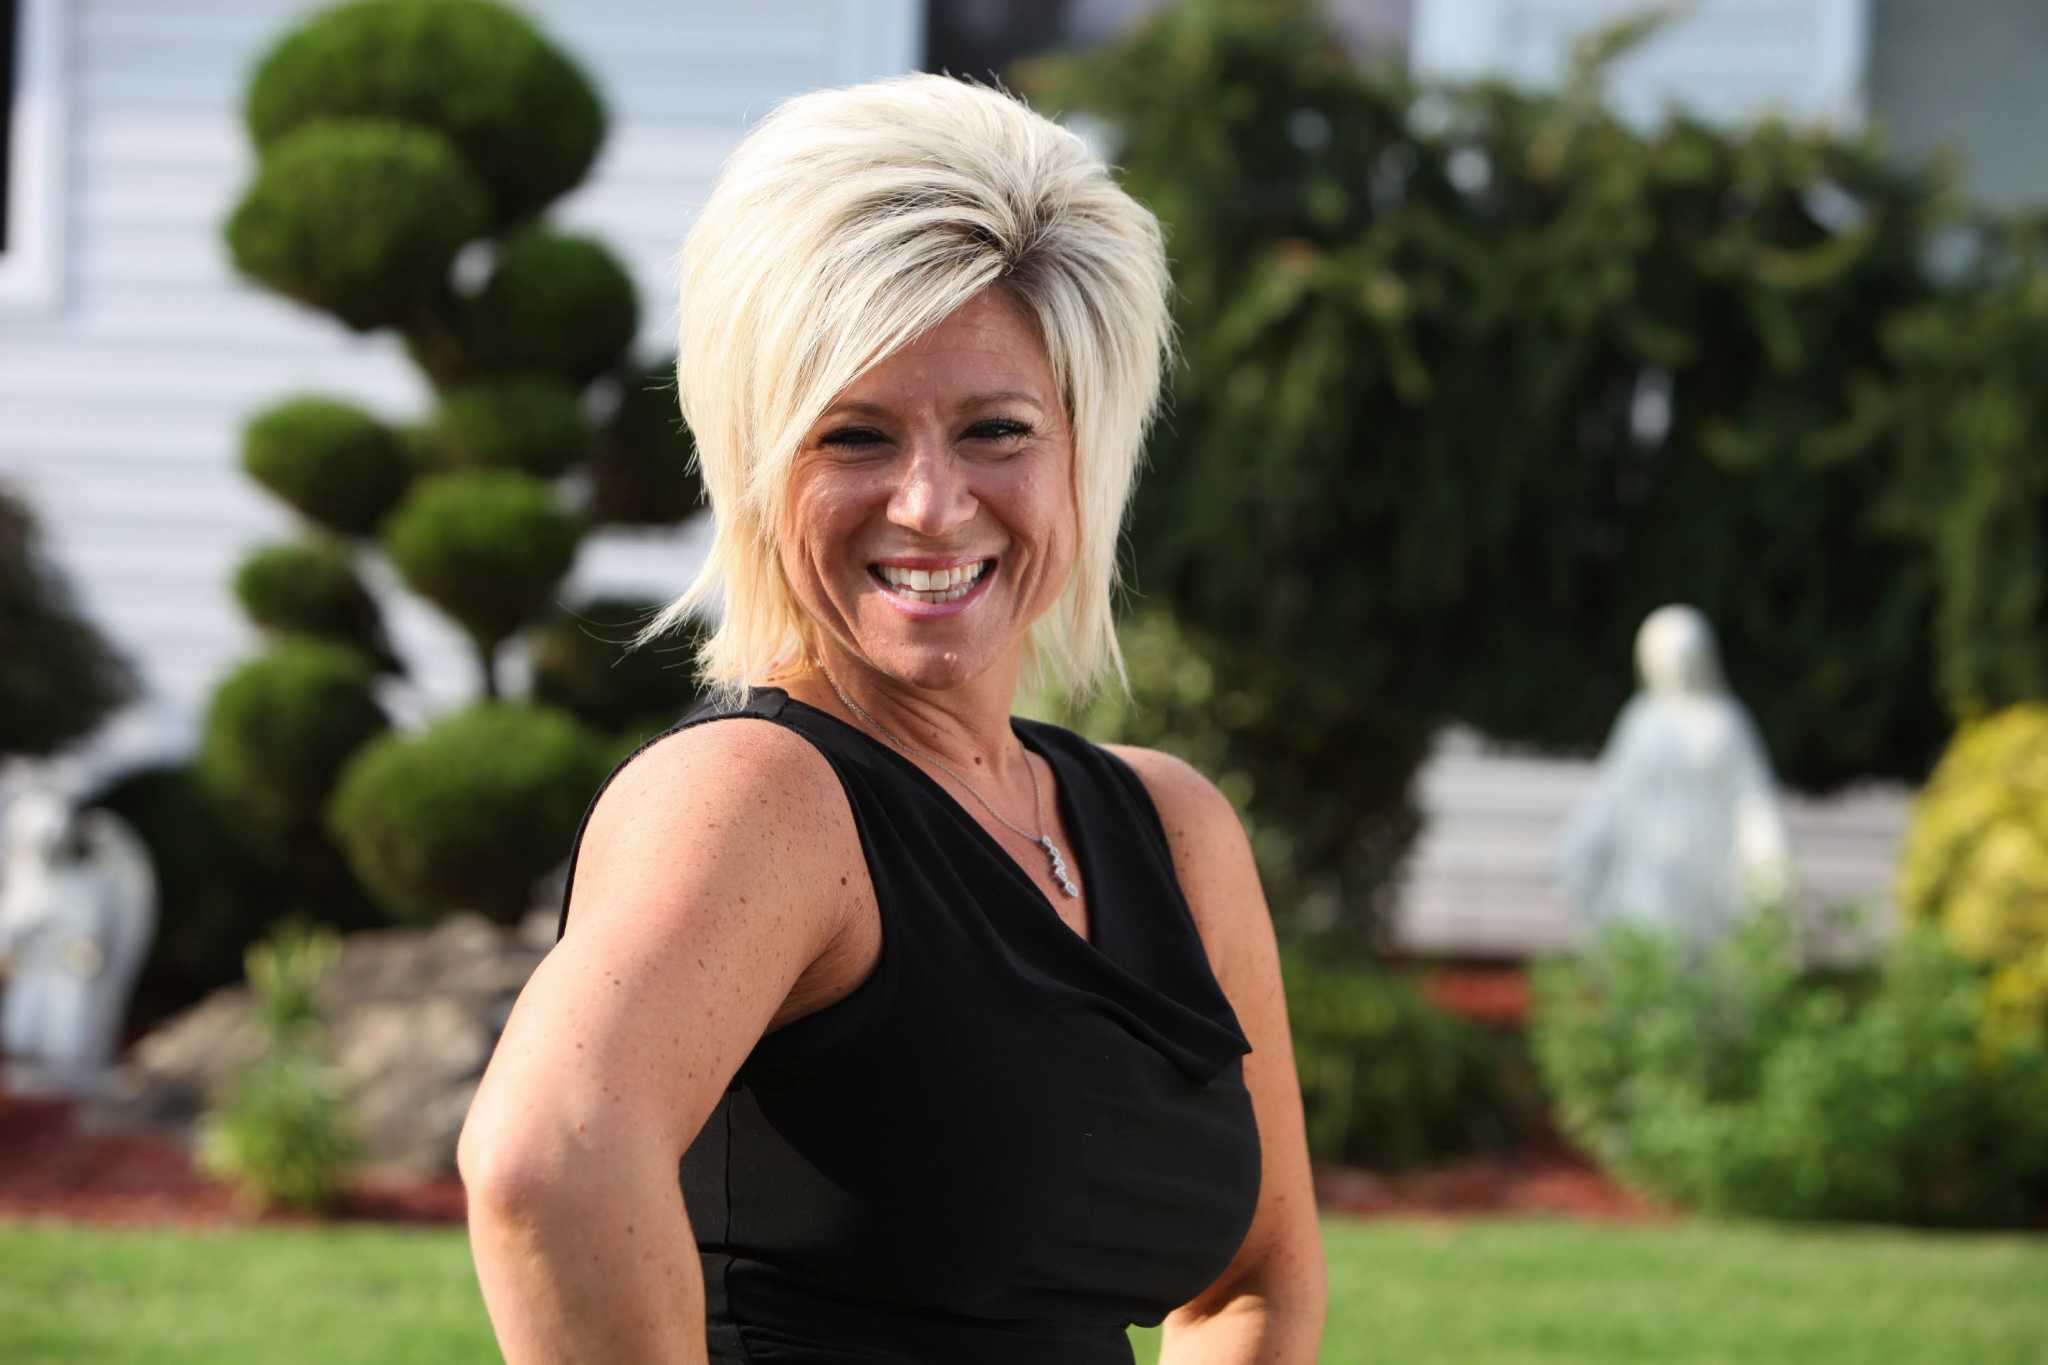 Psychic medium and reality TV star Theresa Caputo is doing an interactive s...